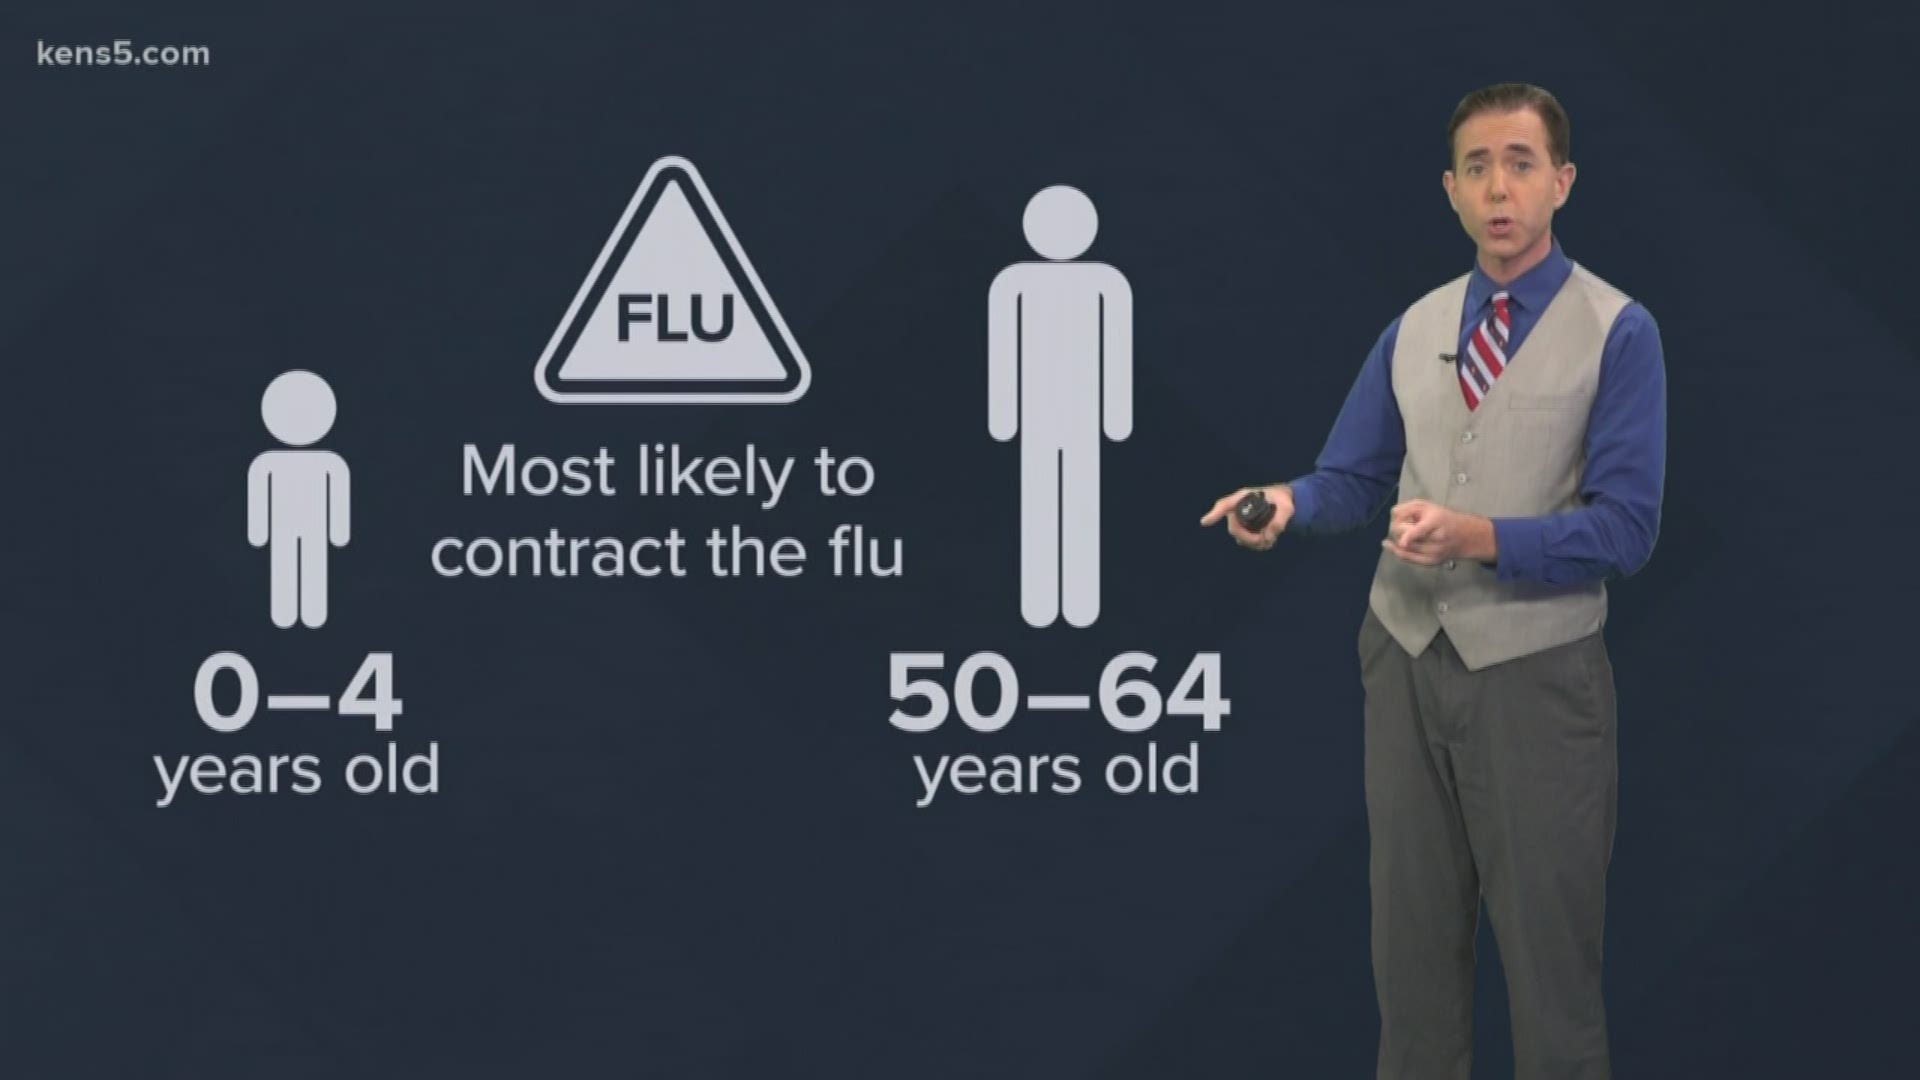 We are just weeks away from the official start of flu season, but doctors say now is the time to get the flu vaccine.